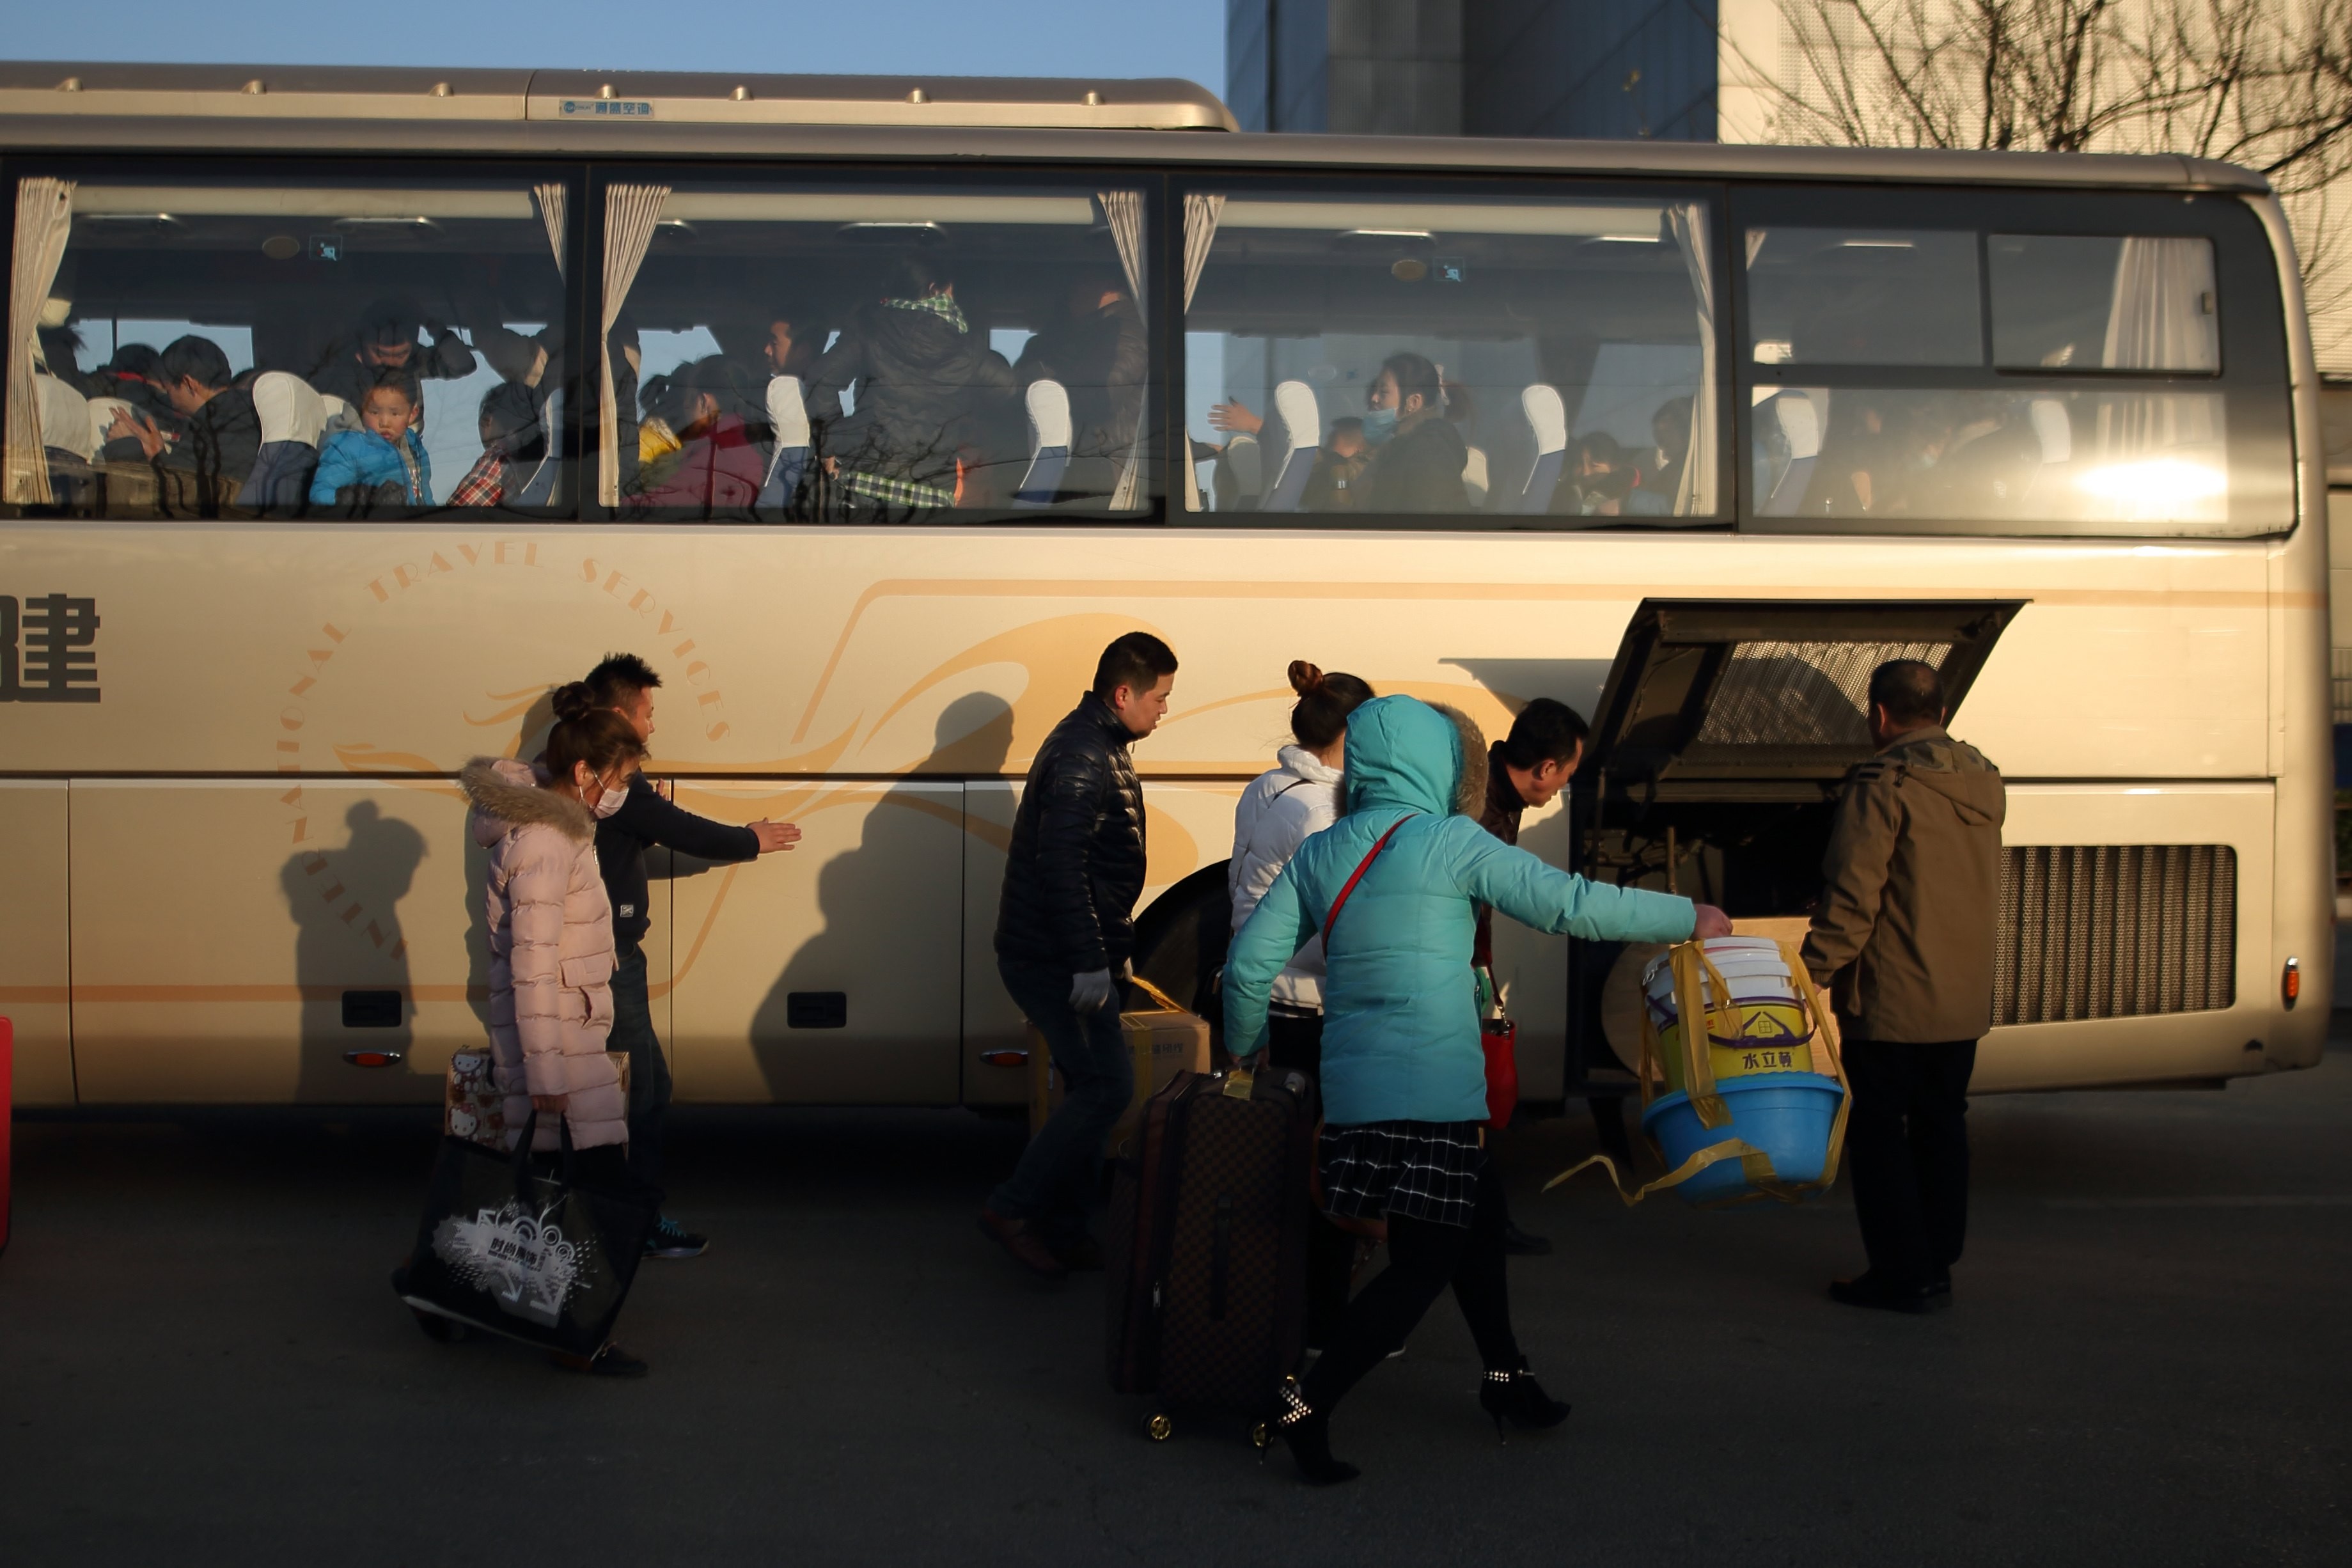 Migrant workers get on a long-distance bus to leave Beijing on November 24, after their factory was closed by the authorities in a crackdown on migrant worker communities. They will move to Changshu in Zhejiang, where the factory will be relocated. Photo: EPA-EFE